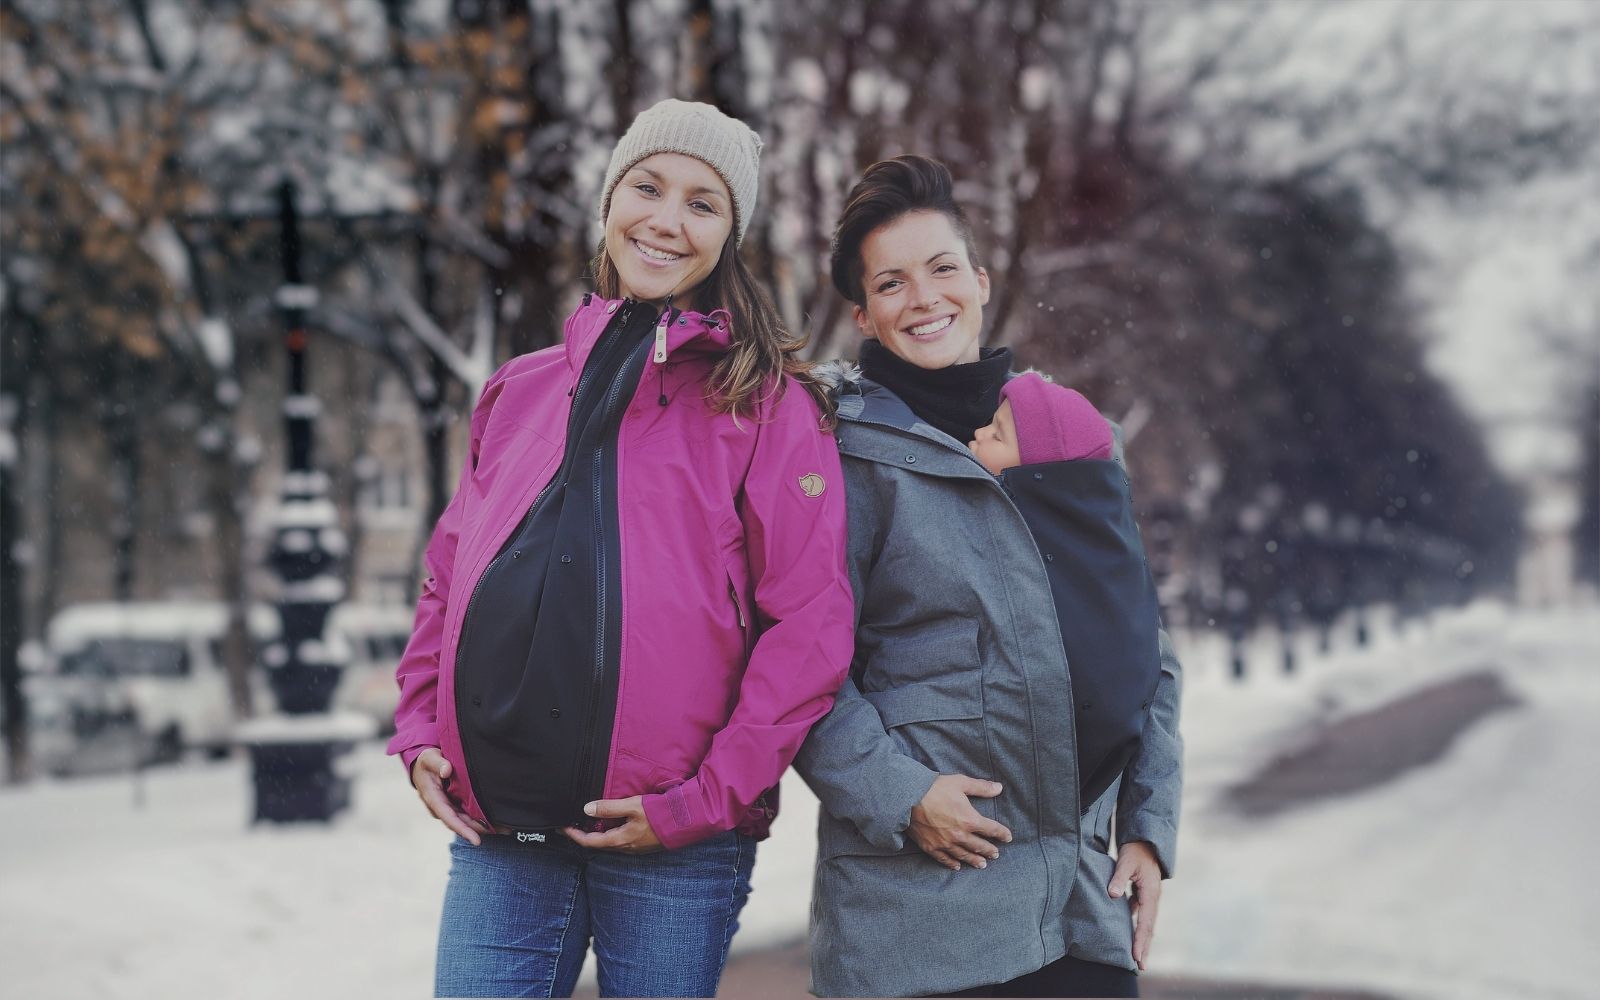 Outdoor Gear For Pregnant People: Maternity Outdoor Clothing